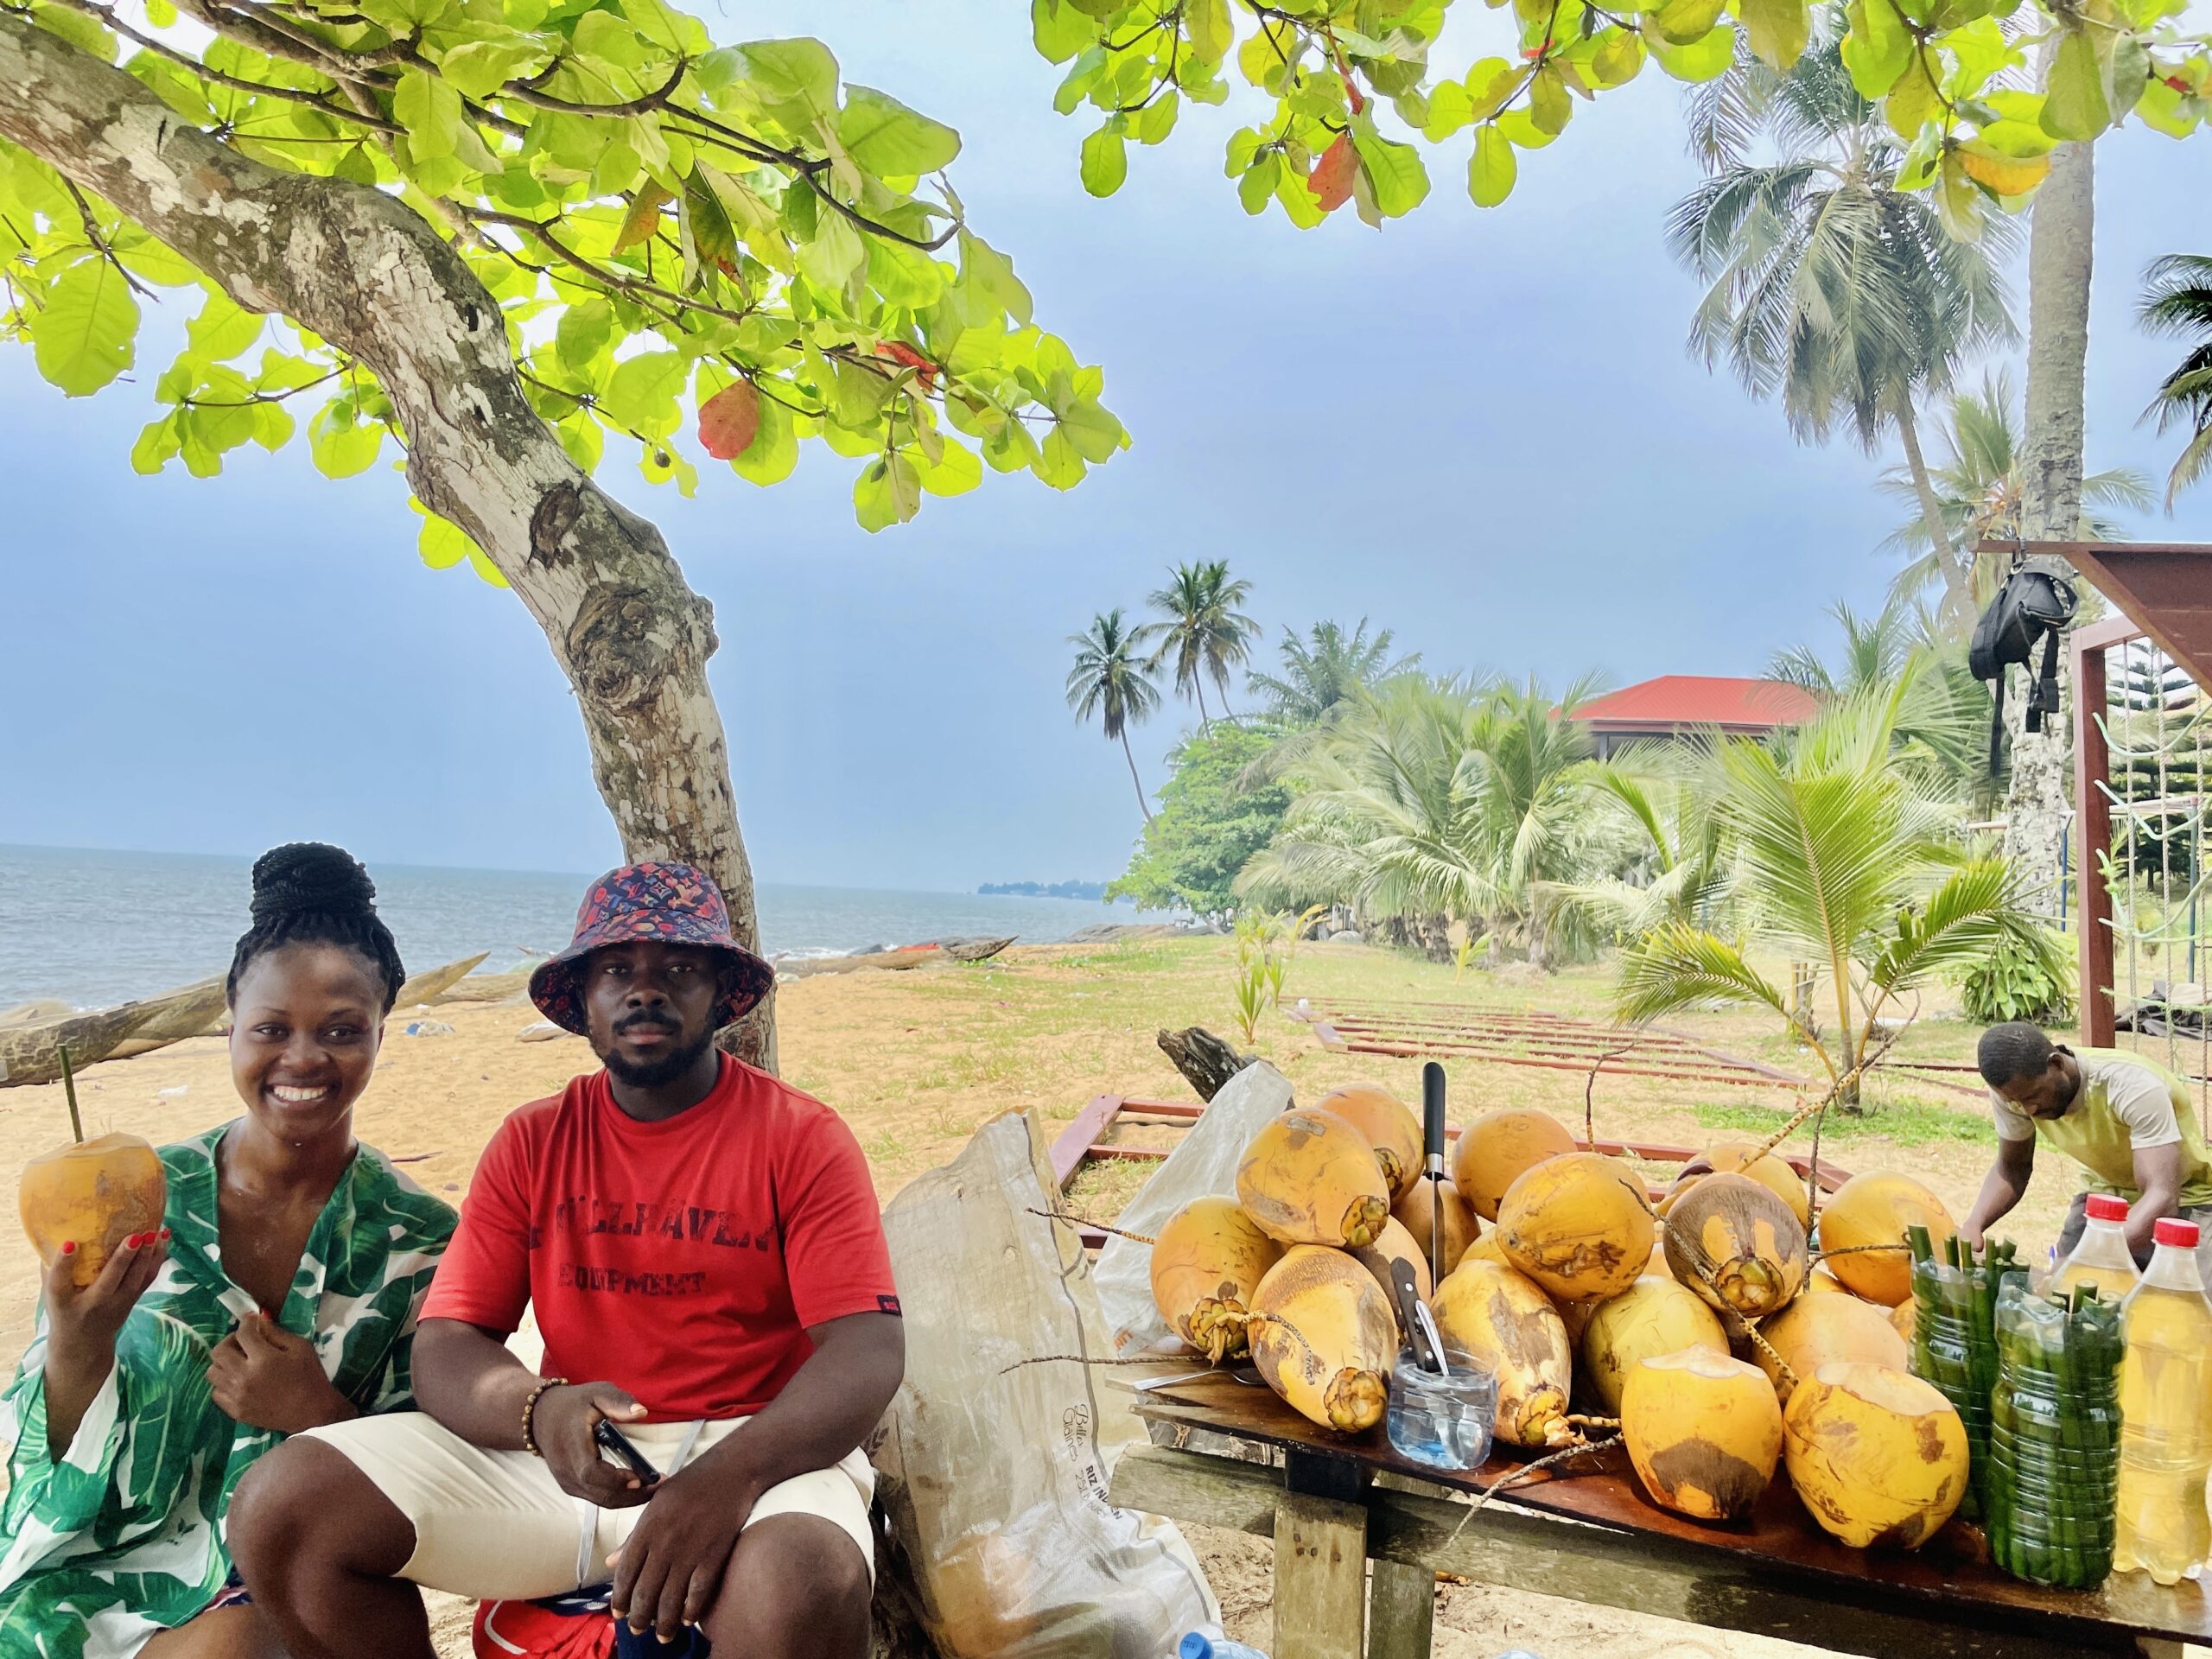 Moumboko Jacques Salvador and the author at Kribi beach in Cameroon where Salvador sells coconut water through bamboo straws.